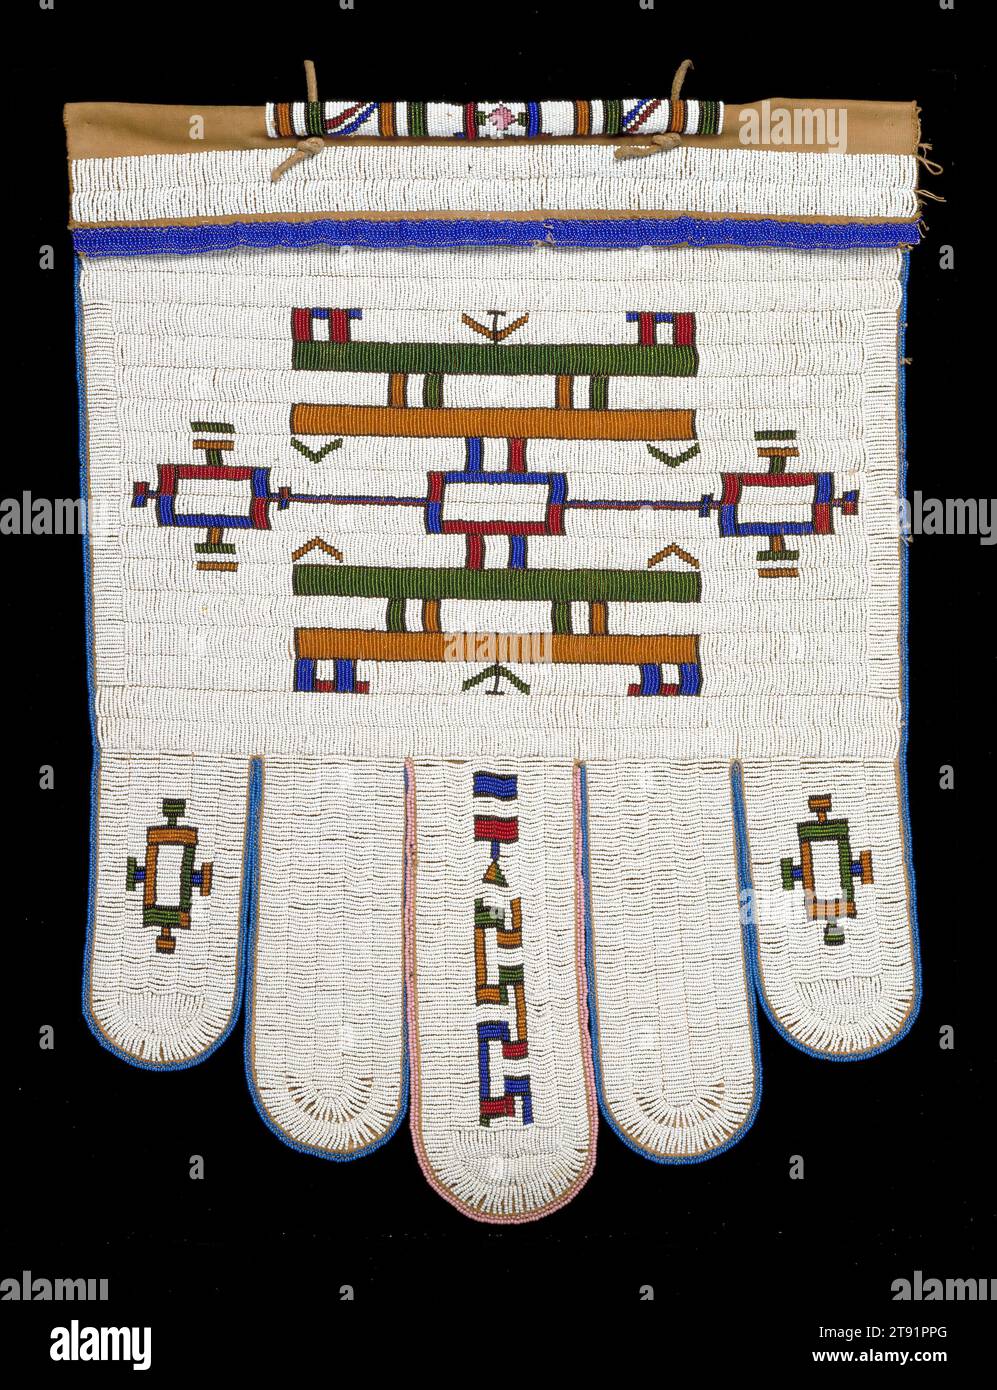 Beaded Apron (Jocolo), 20th century, 27 x 20 1/4 in. (68.58 x 51.44 cm), Leather backed by cloth, glass beads, 2 leather thongs, South Africa, 20th century, Throughout their lives, Southern African Ndebele women wear various aprons that mark stages of social advancement. Pre-adolescent girls wear an apron of one solid piece, called a 'ghabi'; when they reach adolescence, they start wearing a 'pepitu', recognizable by its simple embellishment and lack of flaps. After marriage, a woman wears more elaborately adorned aprons: the 'mapoto', for everyday use, has two square flaps Stock Photo